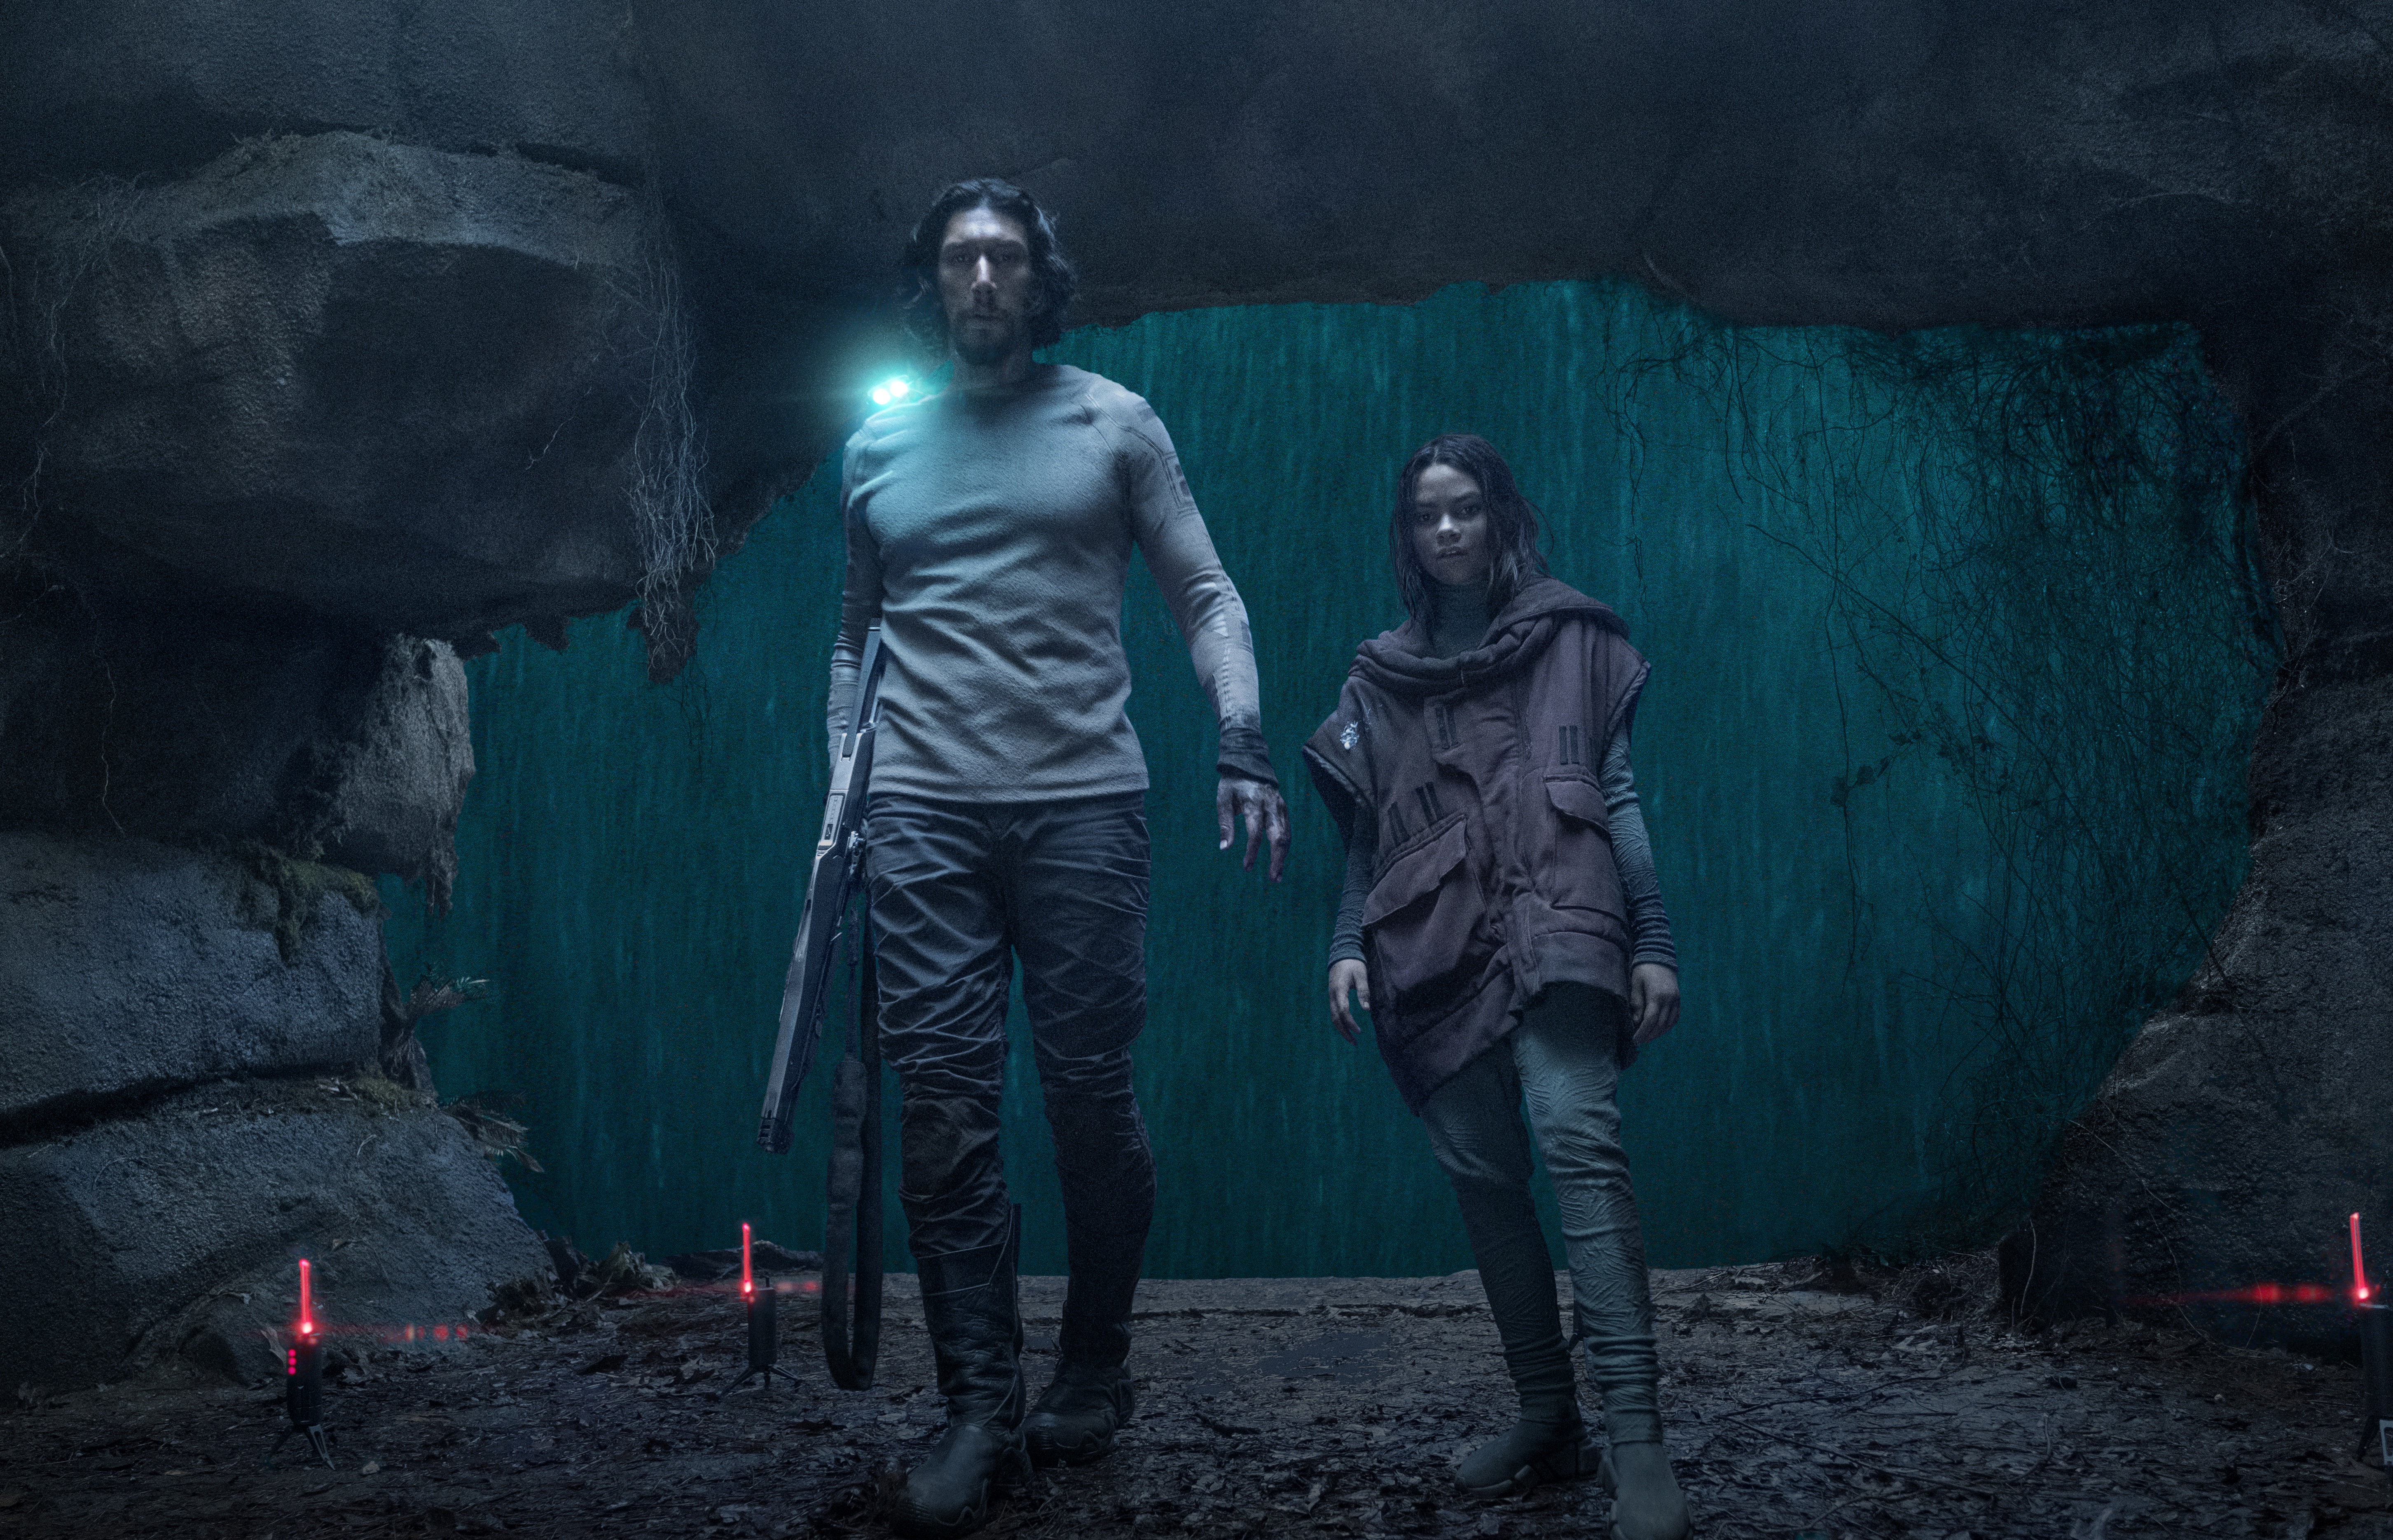 Adam driver’s Mills, wearing a shoulder light and carrying a futuristic rifle, walks with his young brunette teen companion through a cave on a rainy night, setting up a perimeter of red lights in the movie 65